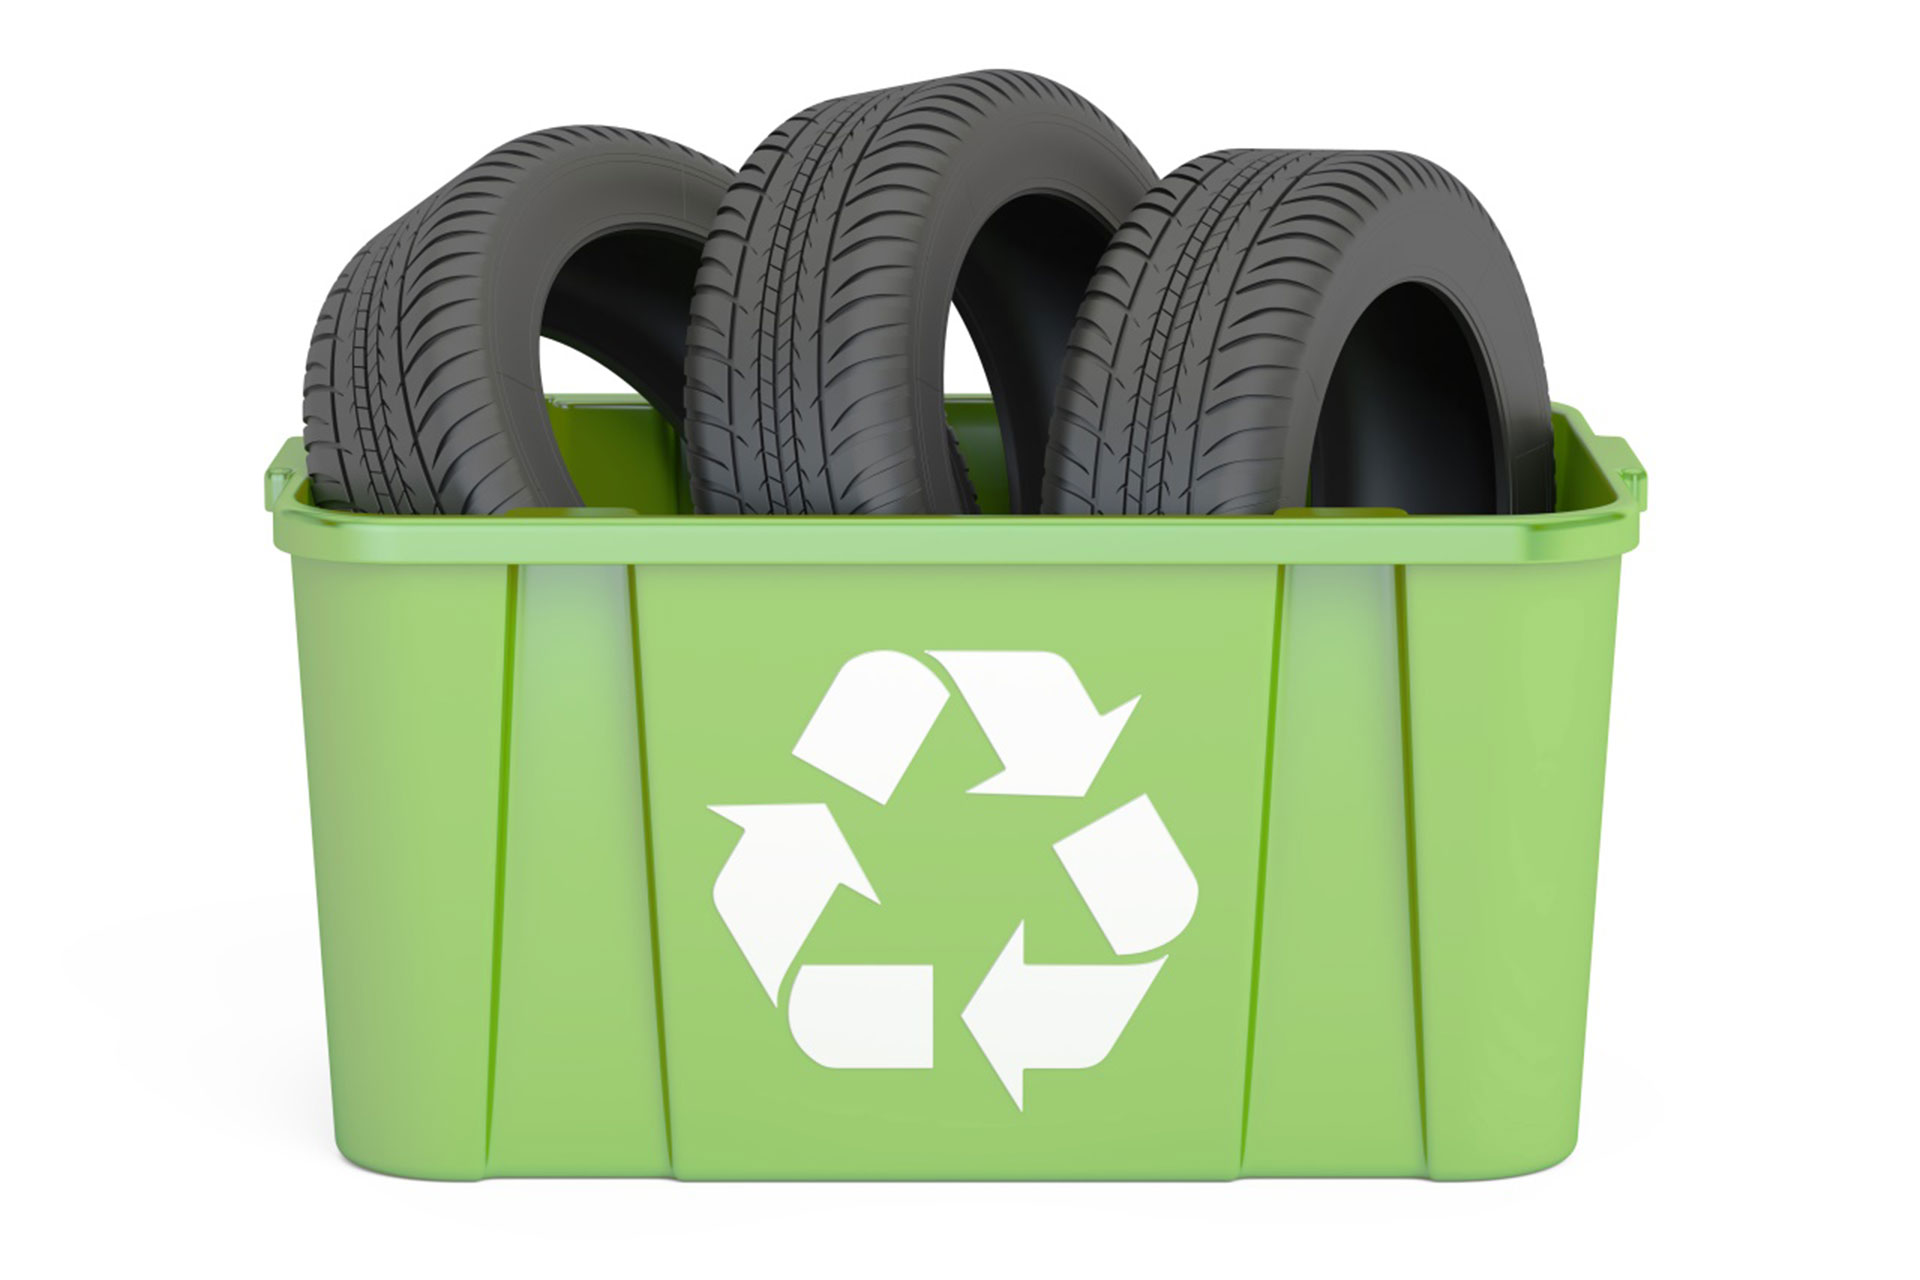 Waste oils and waste tyres management